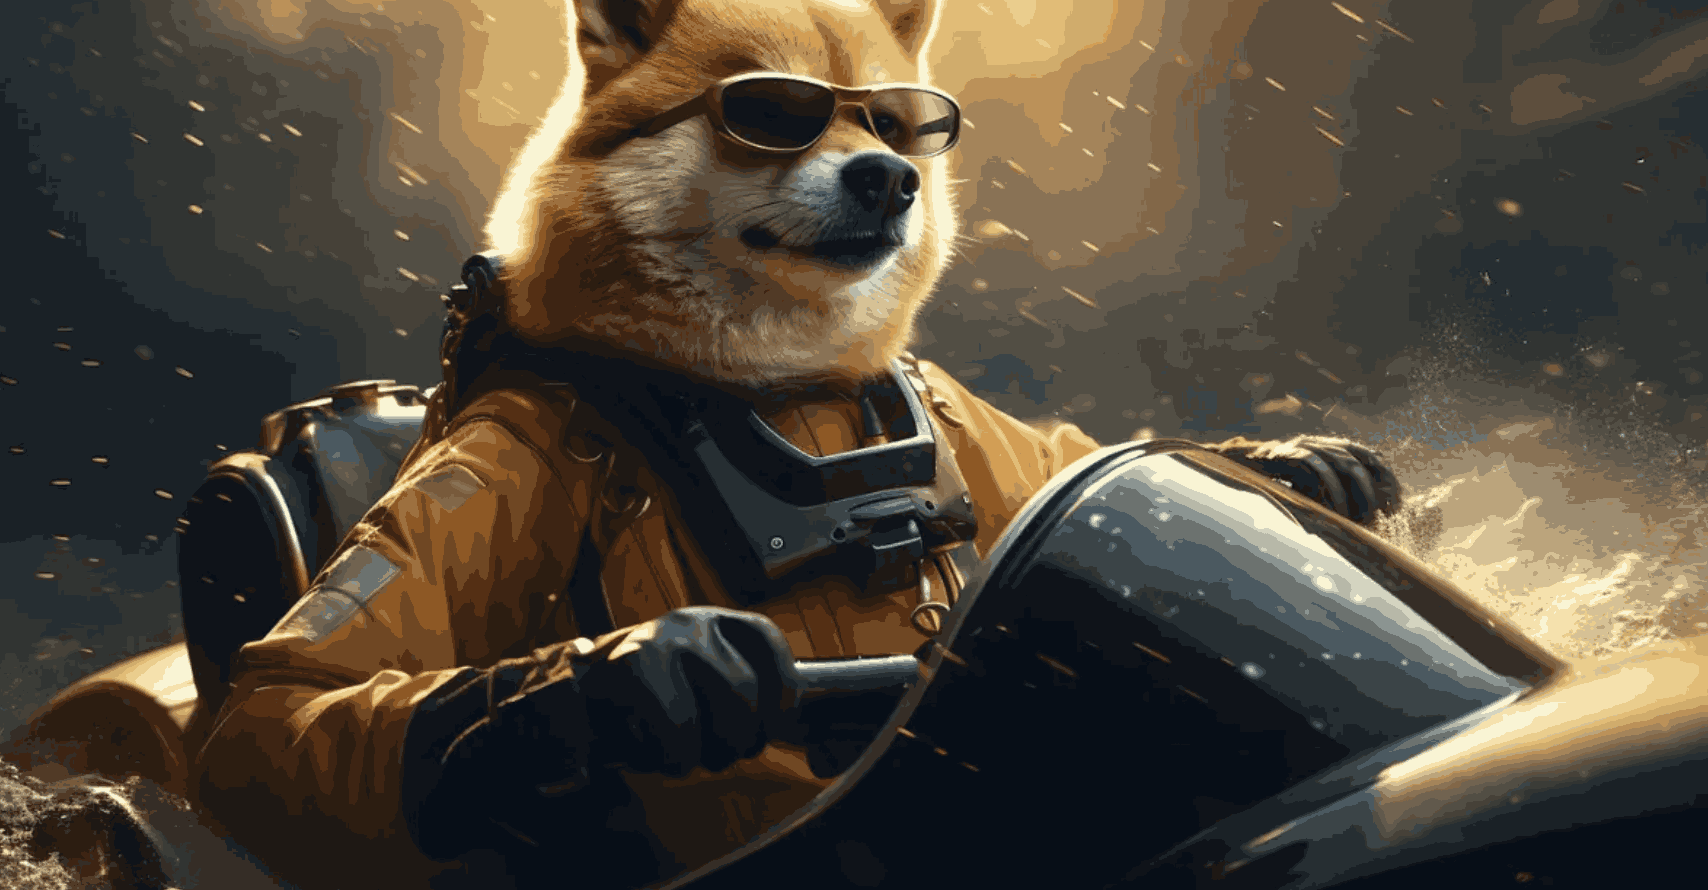 Dog Meme Coins Rise as Dogecoin, Dogwifhat and Floki Pump Over 10%